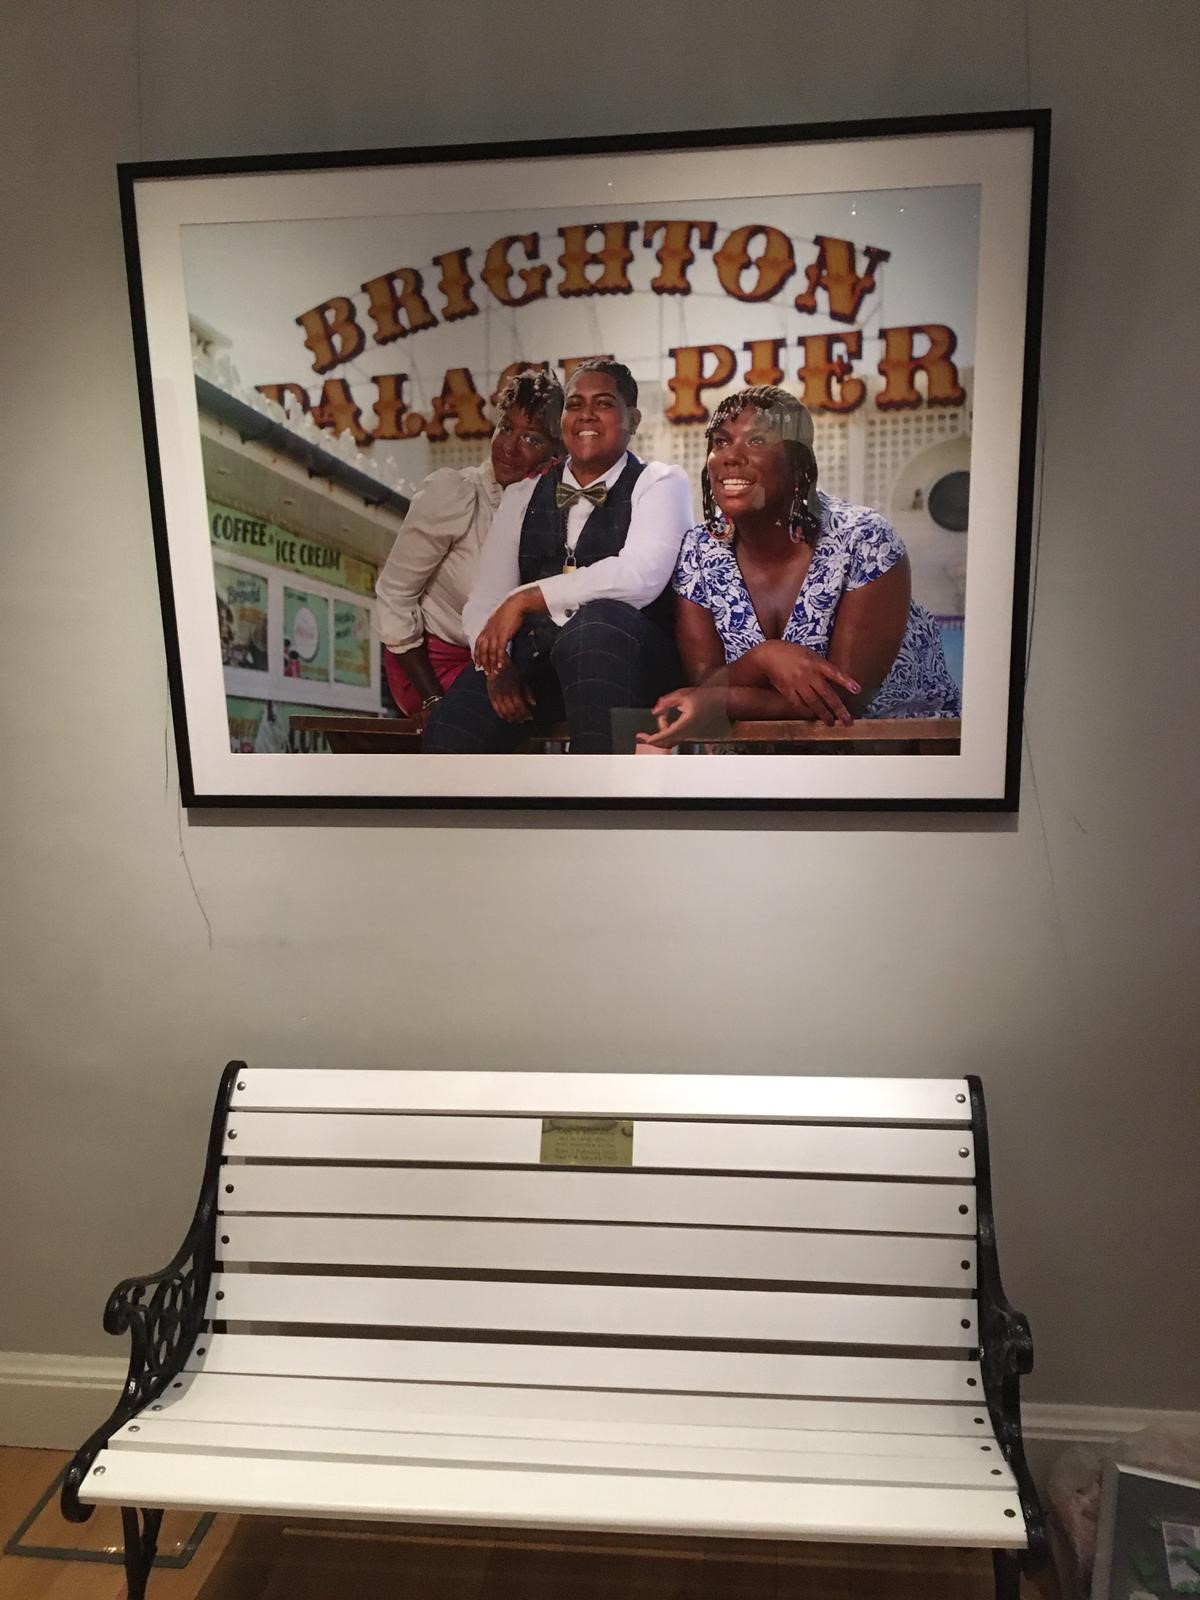 Framed photo of three people on Brighton pier hanging above a white bench with black metal arms in a room.